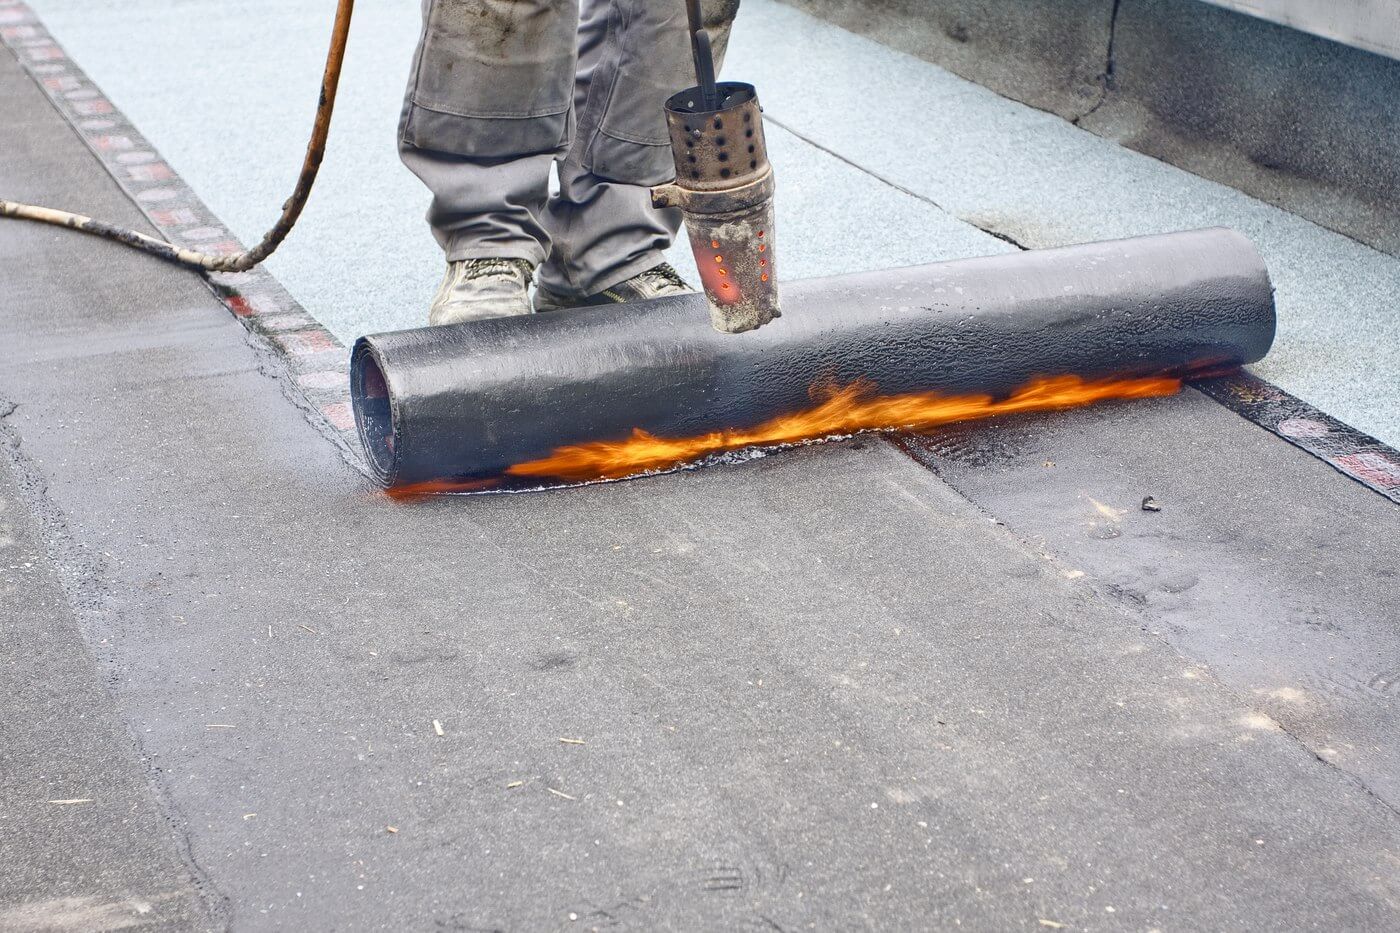 Modified Bitumen Vs Roll Roofing: Which Is Better And Why